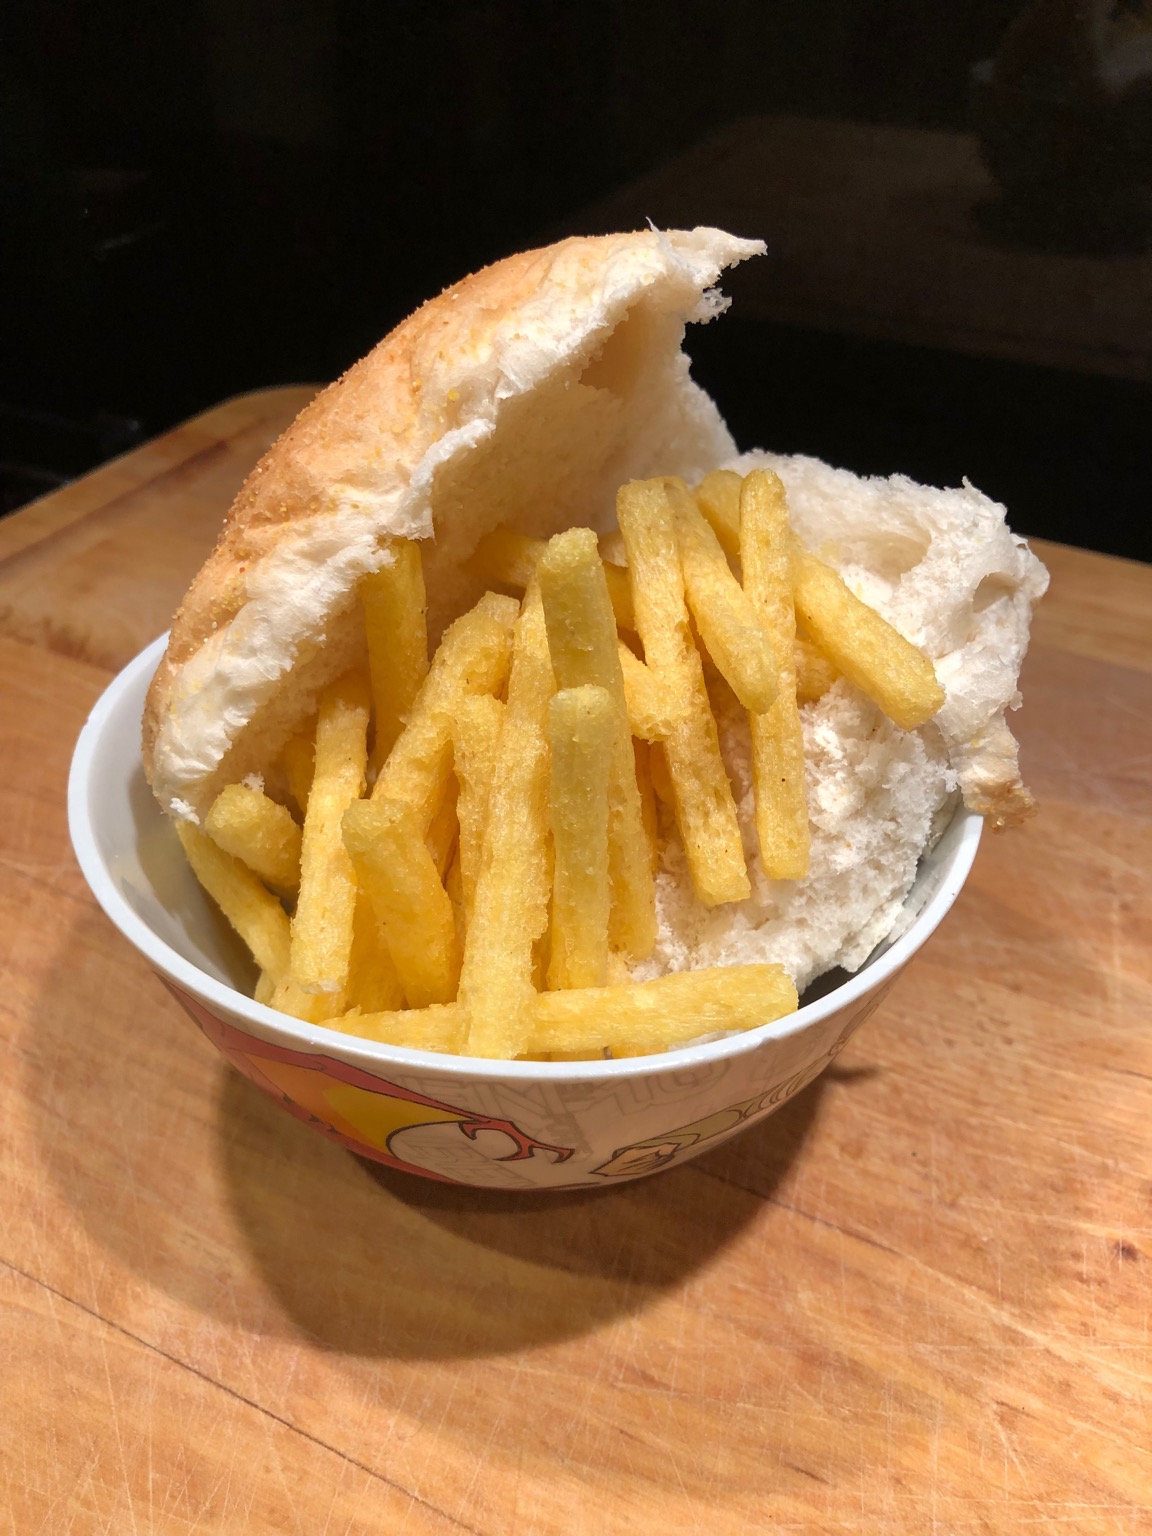 Half-open white roll with Chipsticks piled in